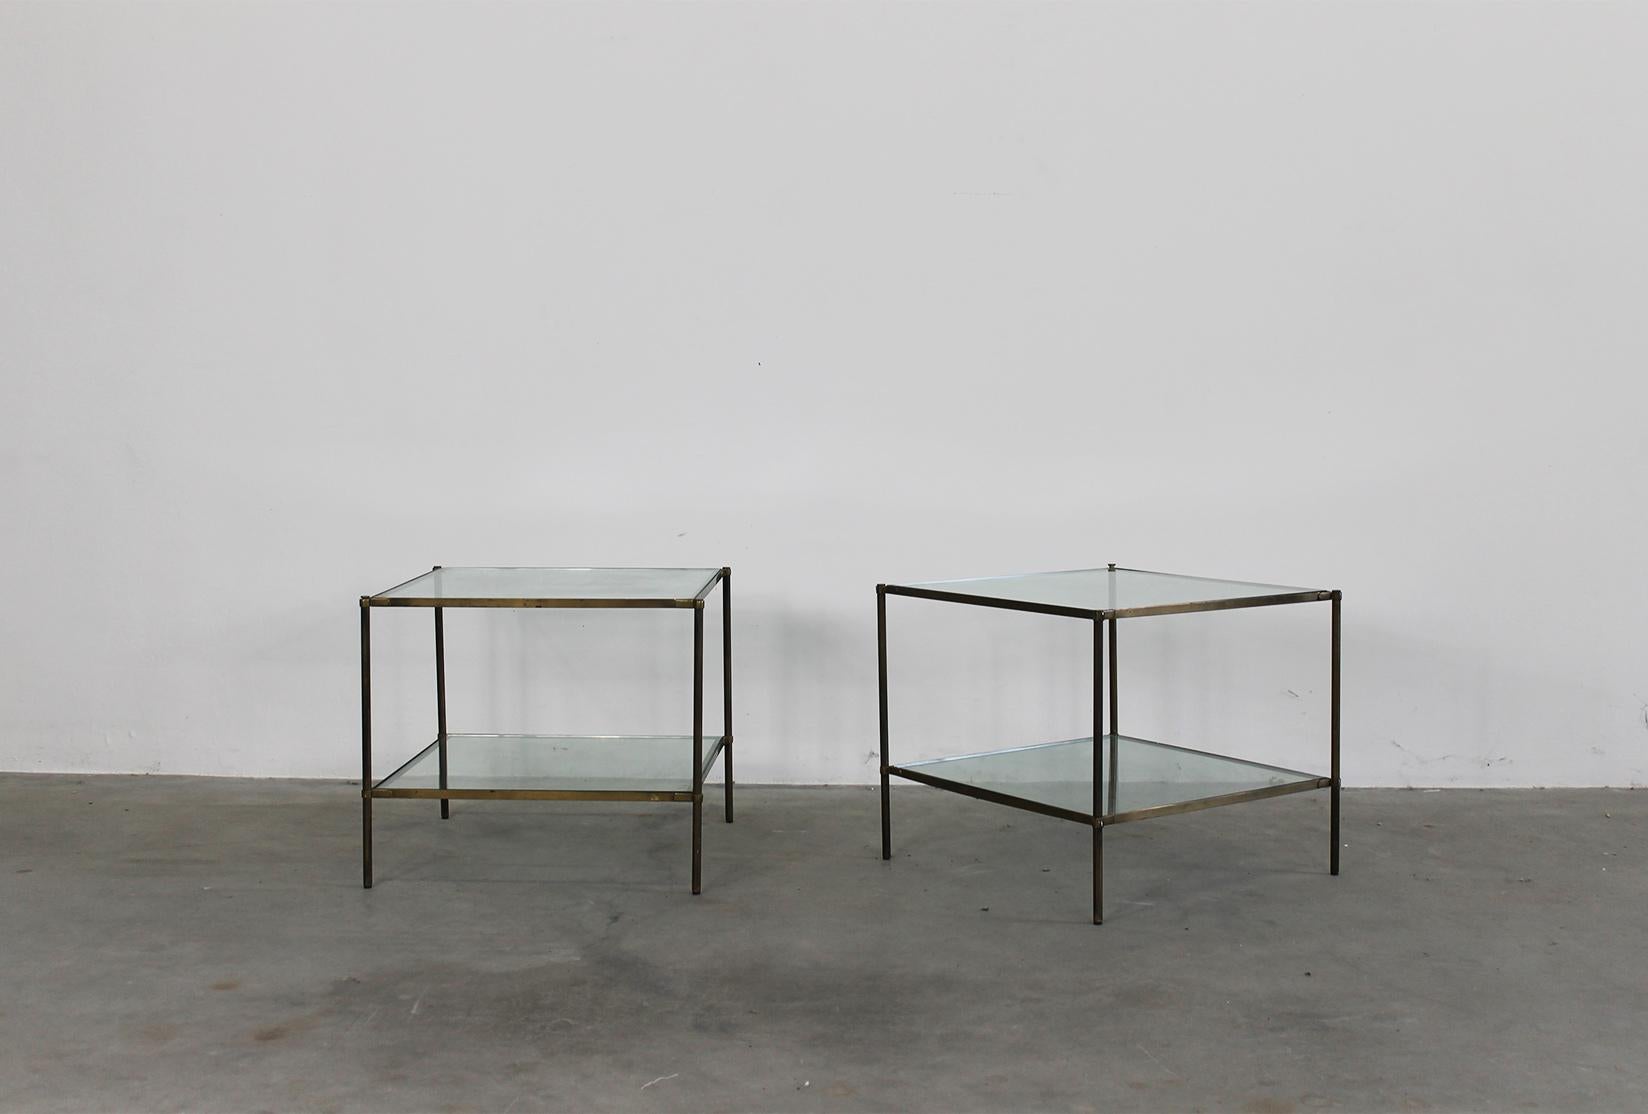 A set of two Montecarlo (T12) side tables with a simple and elegant brass structure and tabletops in crystal, they are the perfect companion for any seats, beds, or desks.

The brass structure present a pleasant patina due to the age of the